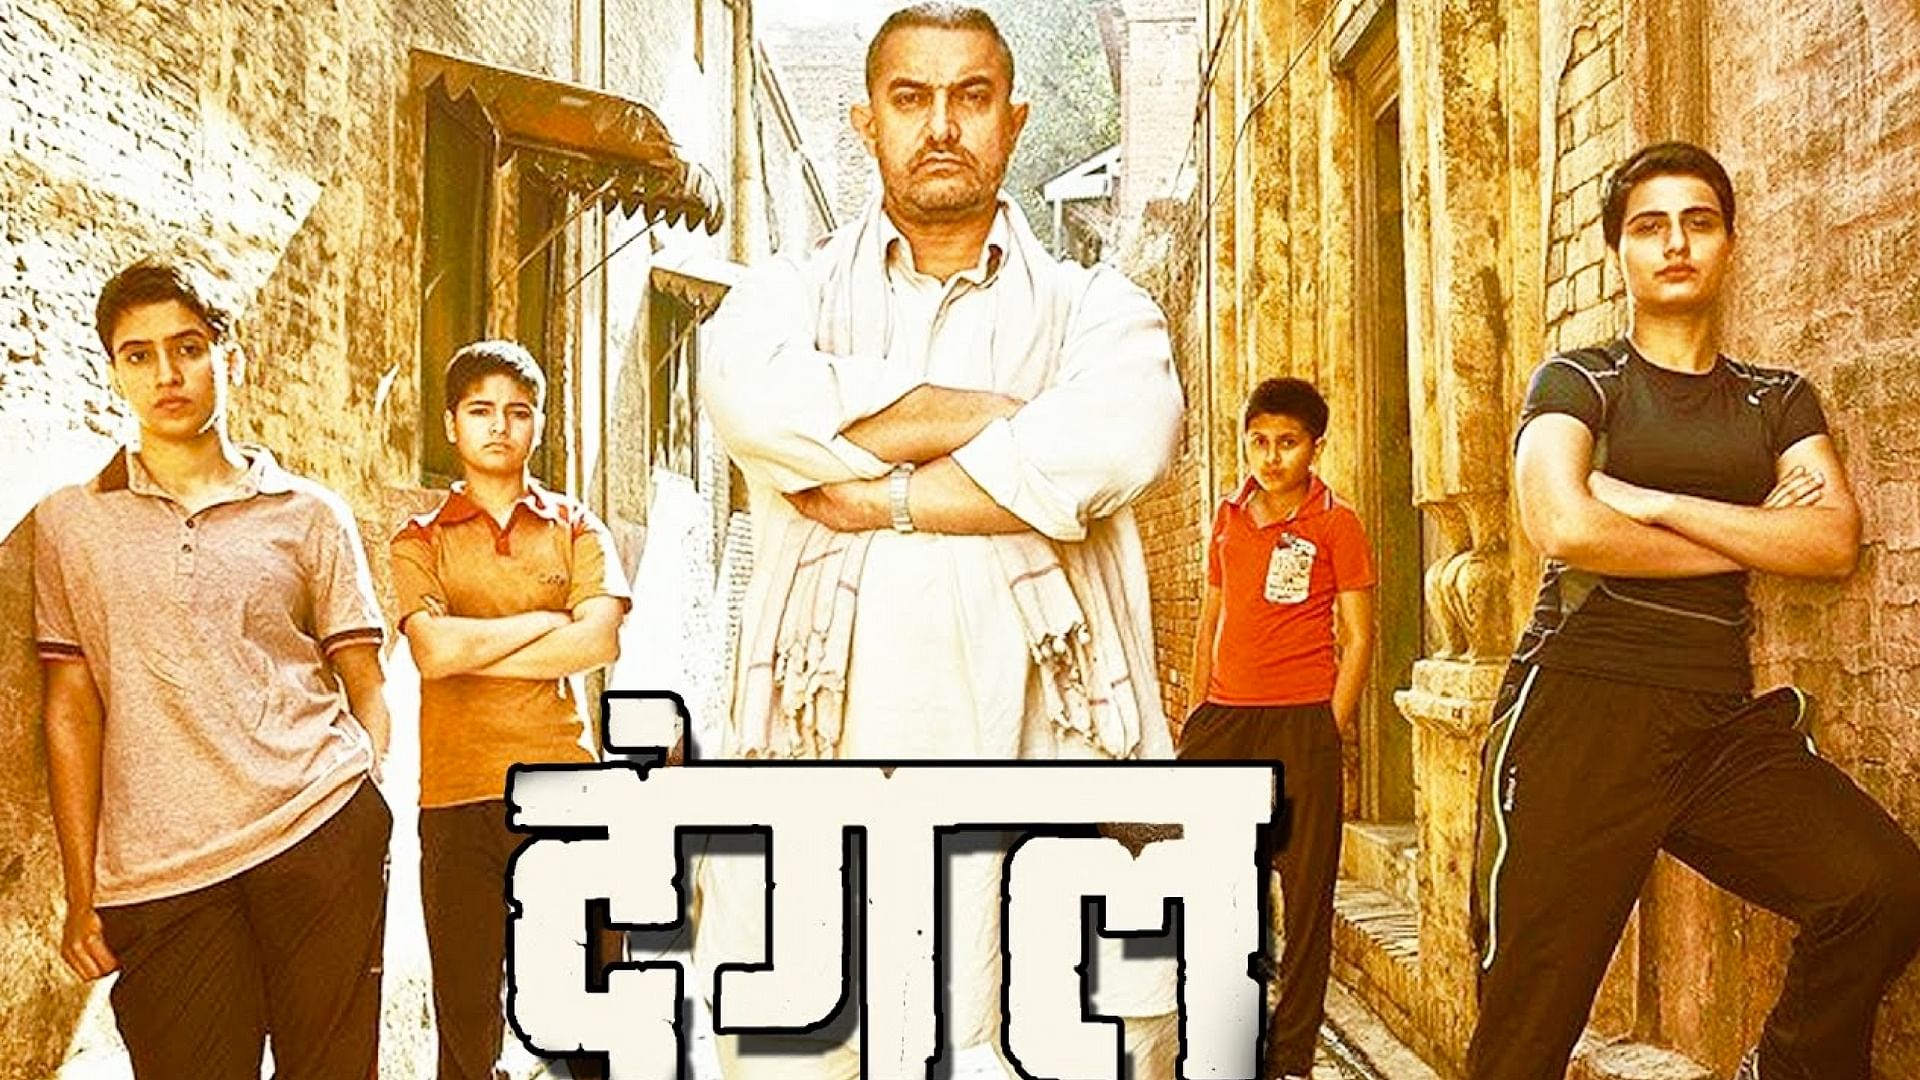 dangal movie online good quality forums